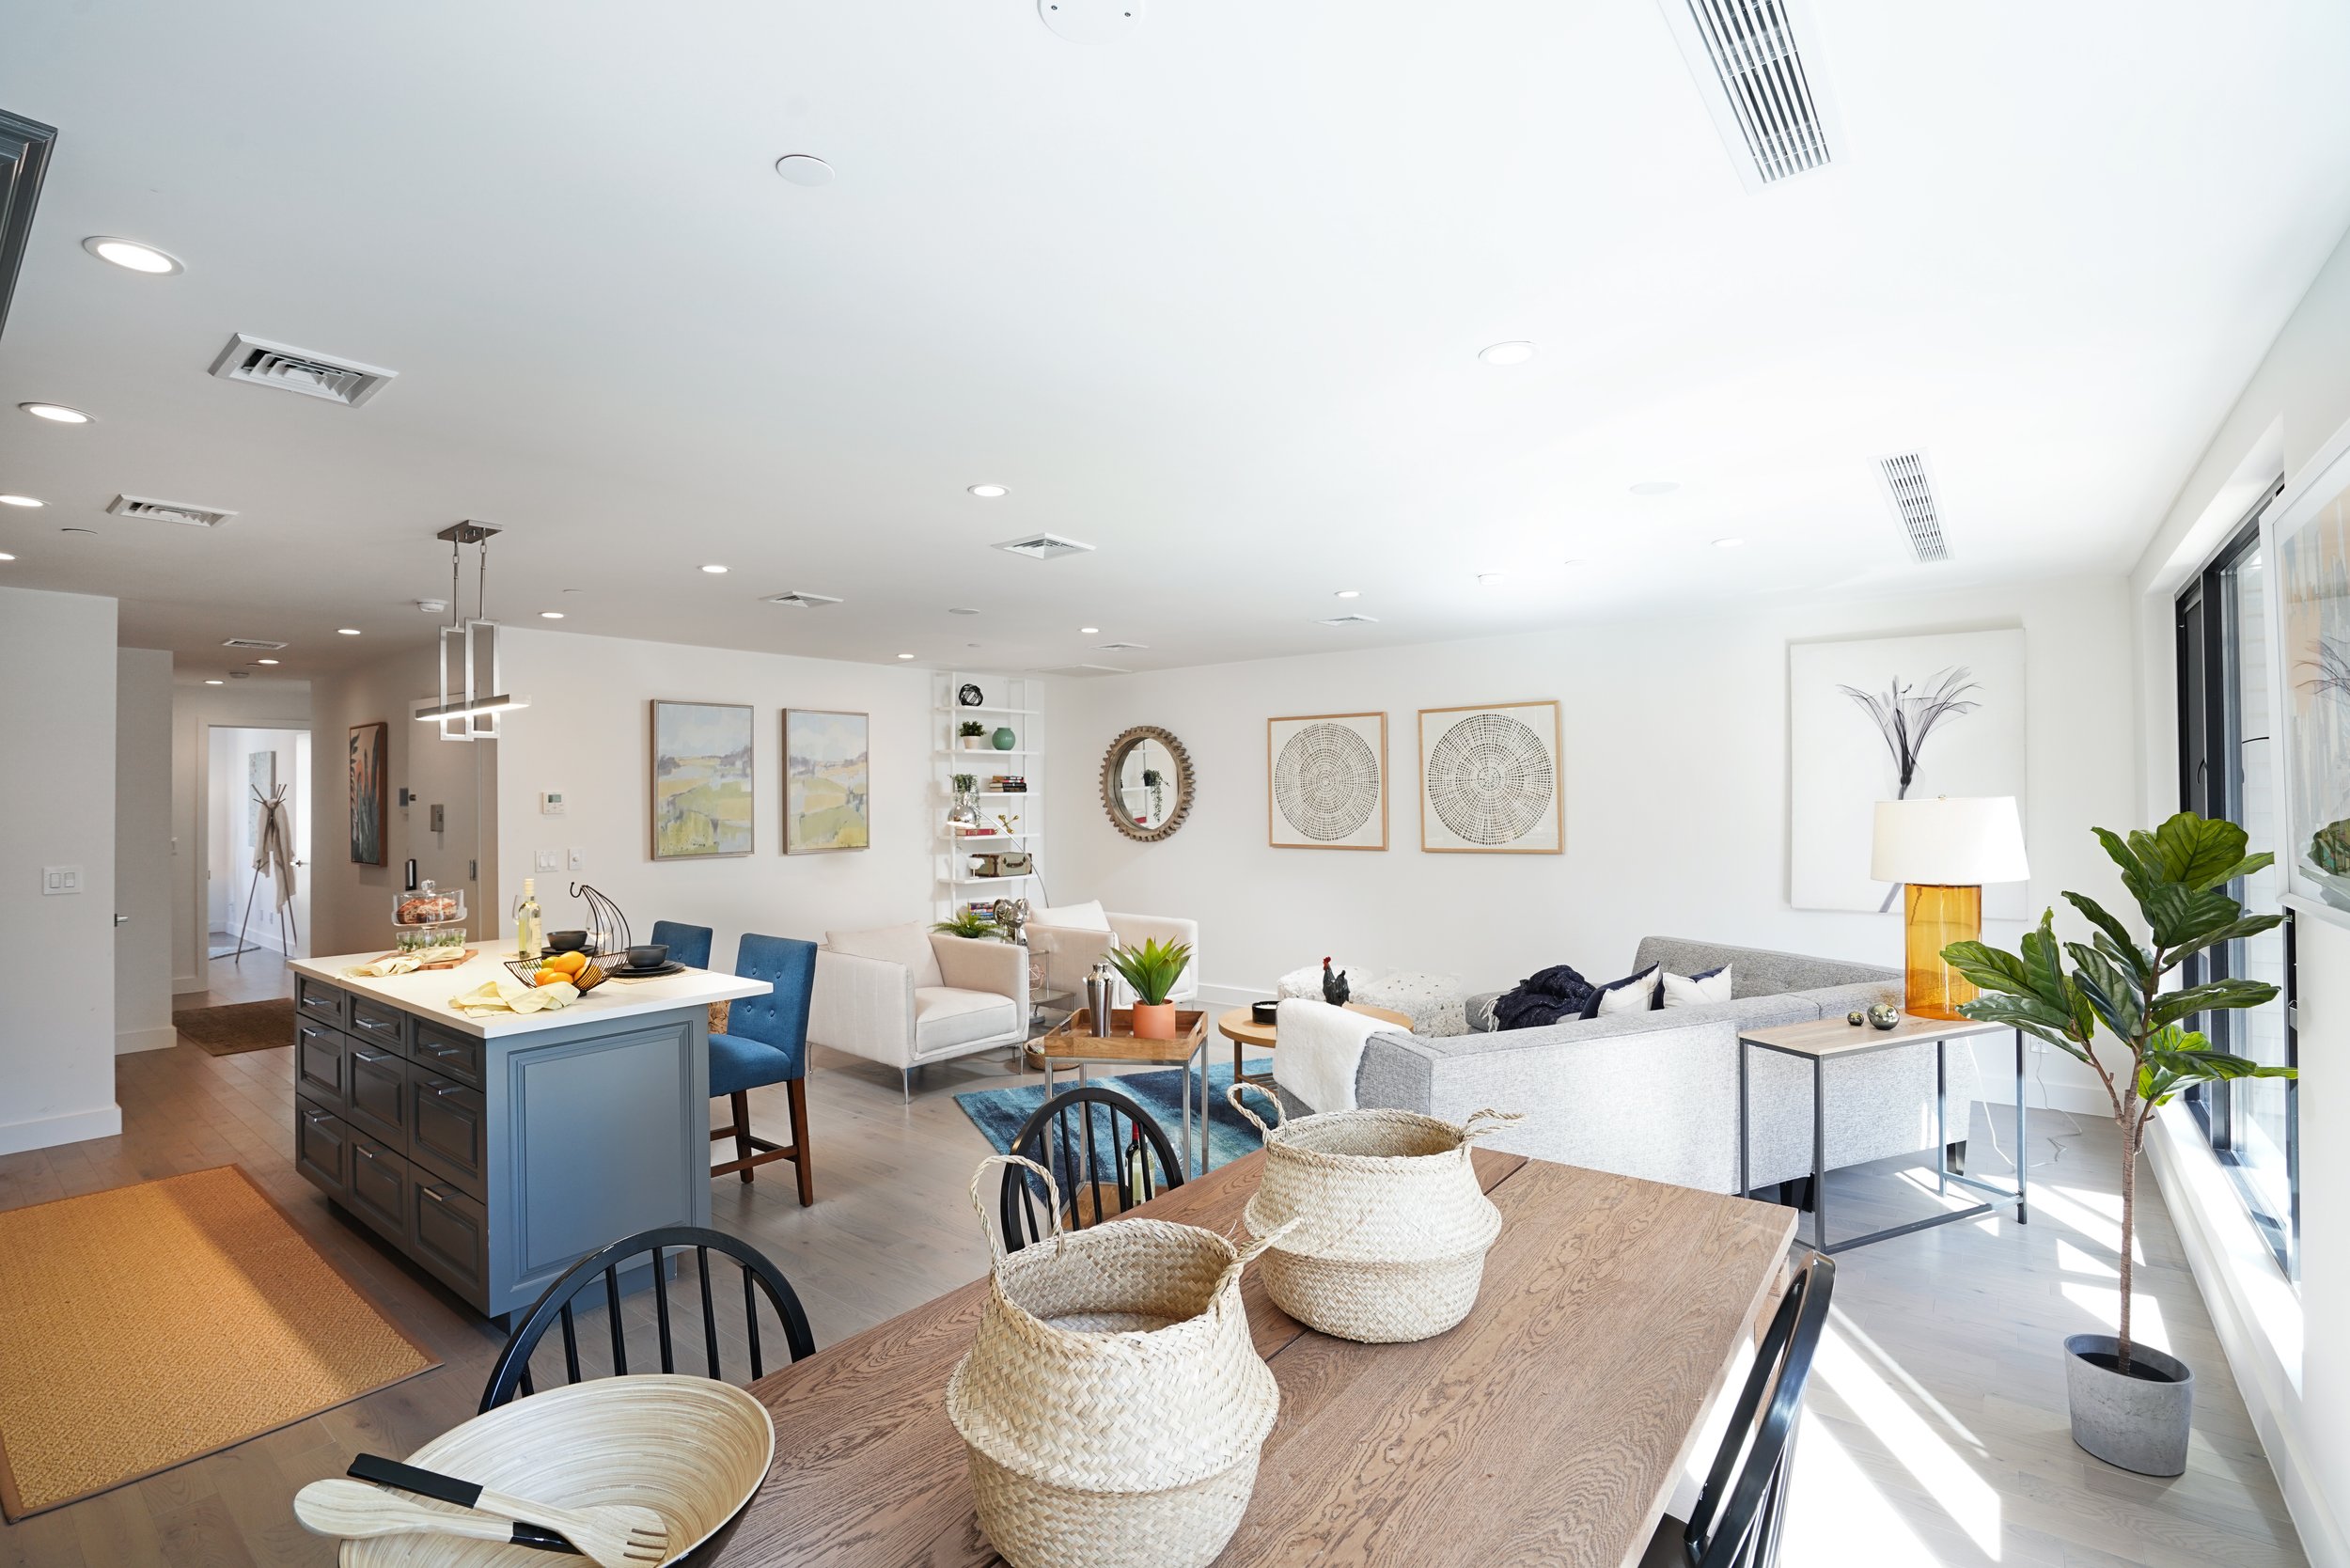  “With people continuing to work, live and entertain in their homes, buyers are rethinking their top priorities, which is greatly impacting design decisions–smart boutique developers have taken notice,” said Robert Earl, co-founder of The InHouse Gro